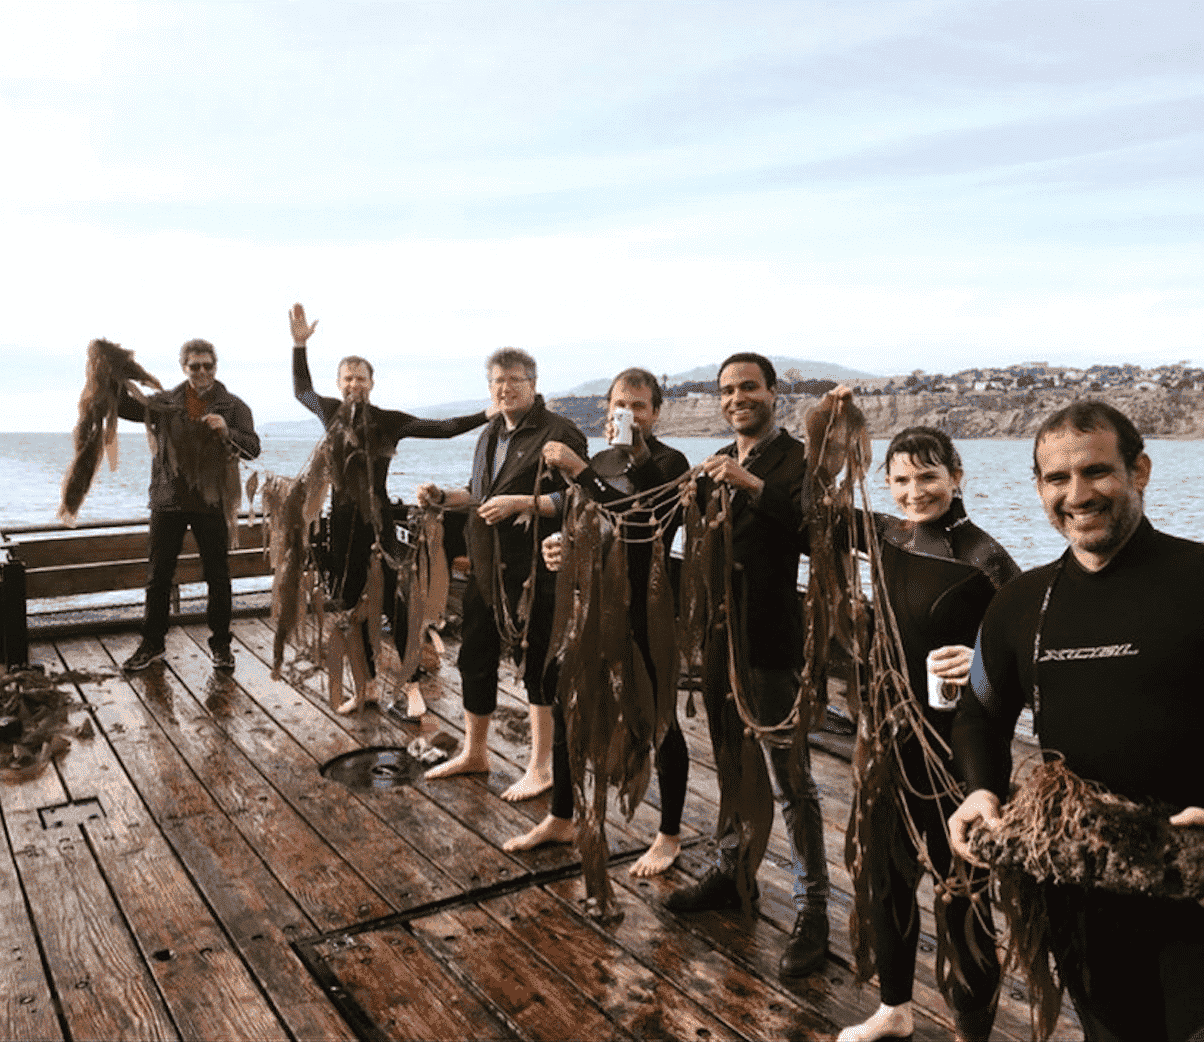 Primary Ocean's MacroSystems research team with giant kelp.